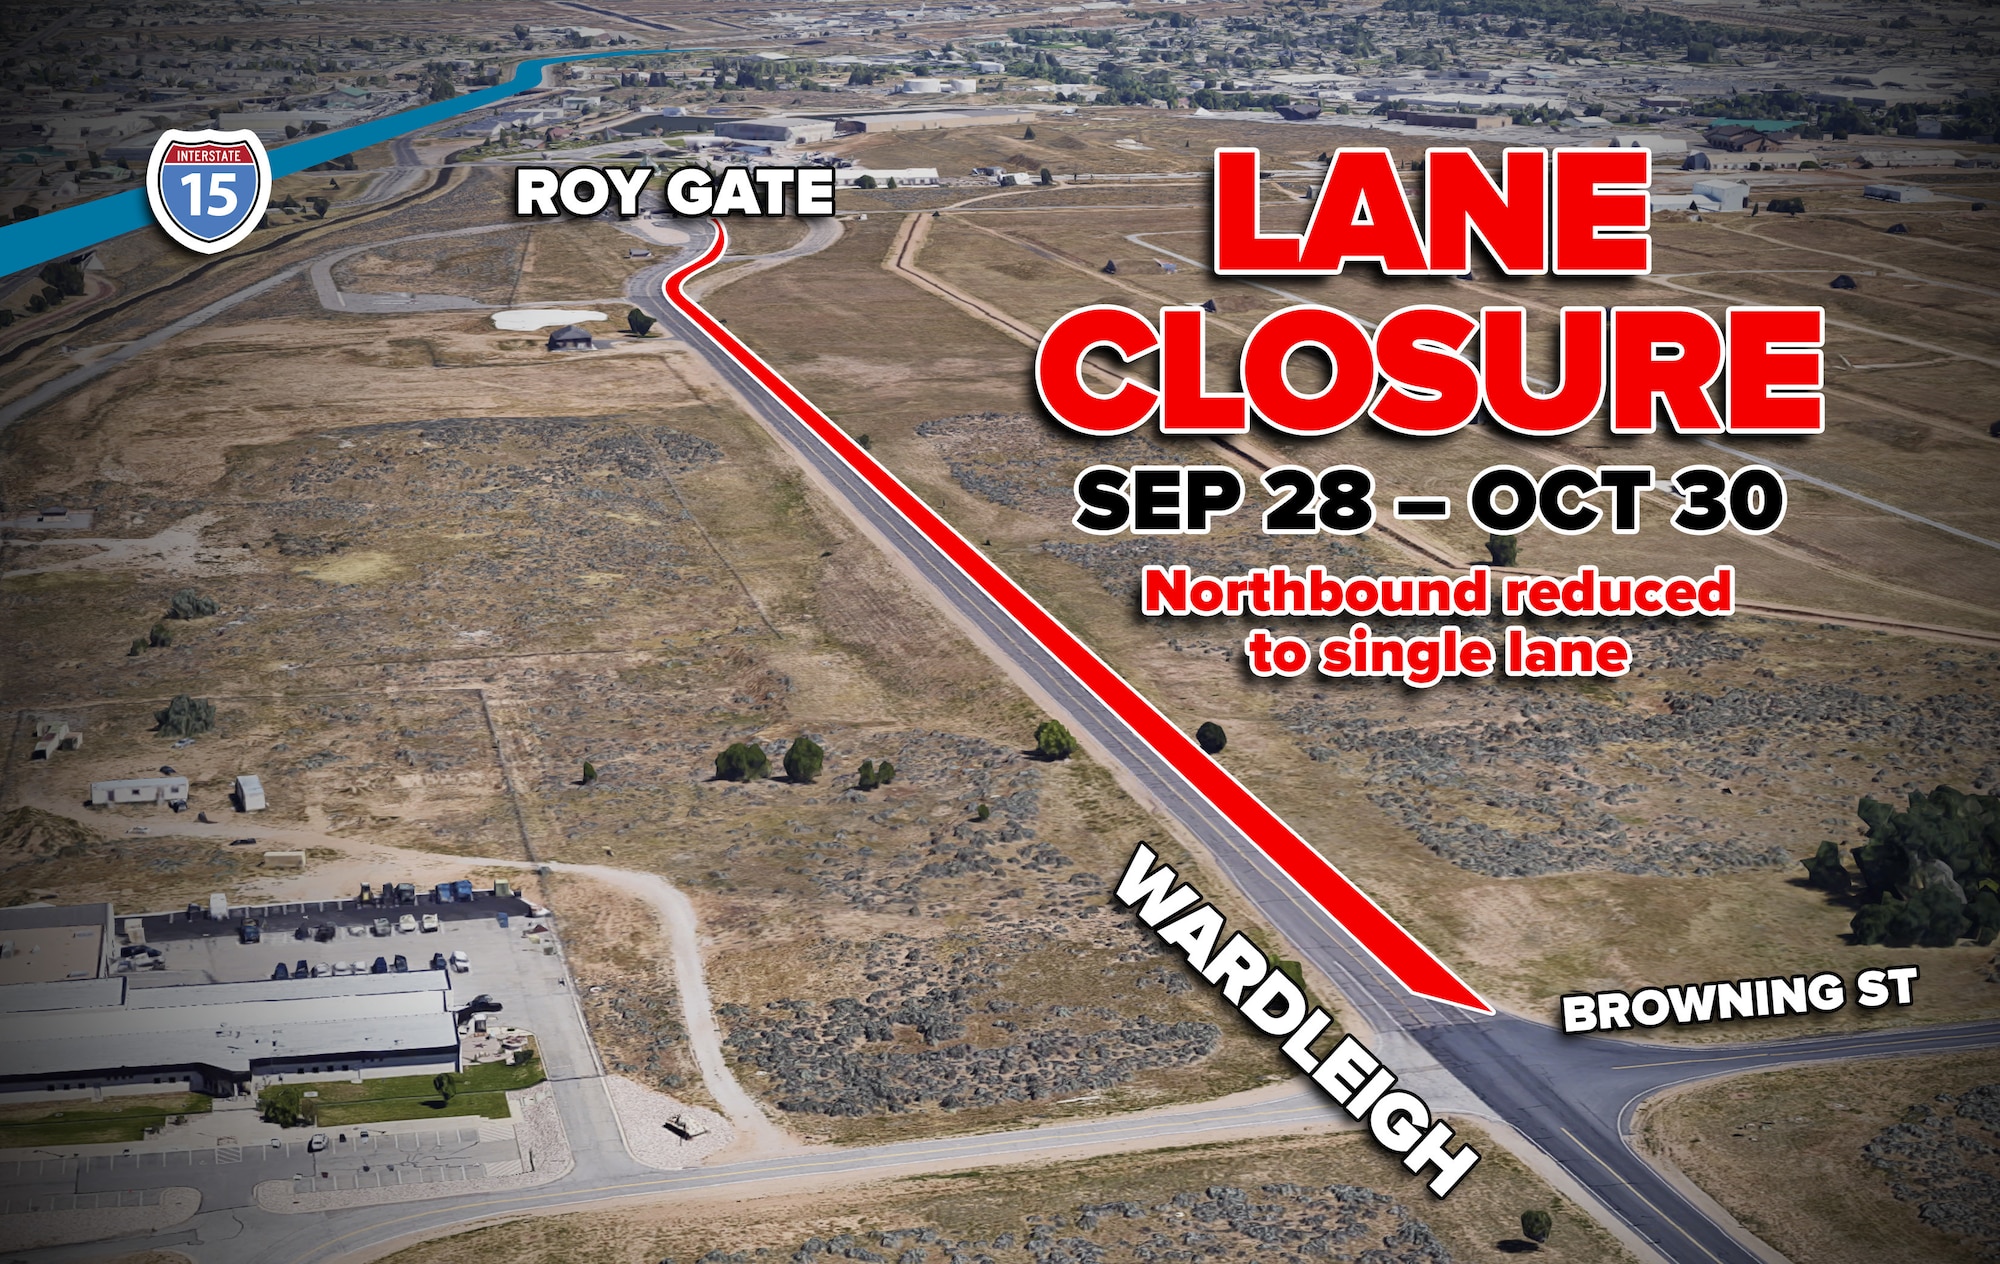 Graphic depicting a map where intermittent northbound lane closures will be in effect Sept. 28 through Oct. 30 on Wardleigh Road between Browning Street and the Roy Gate.